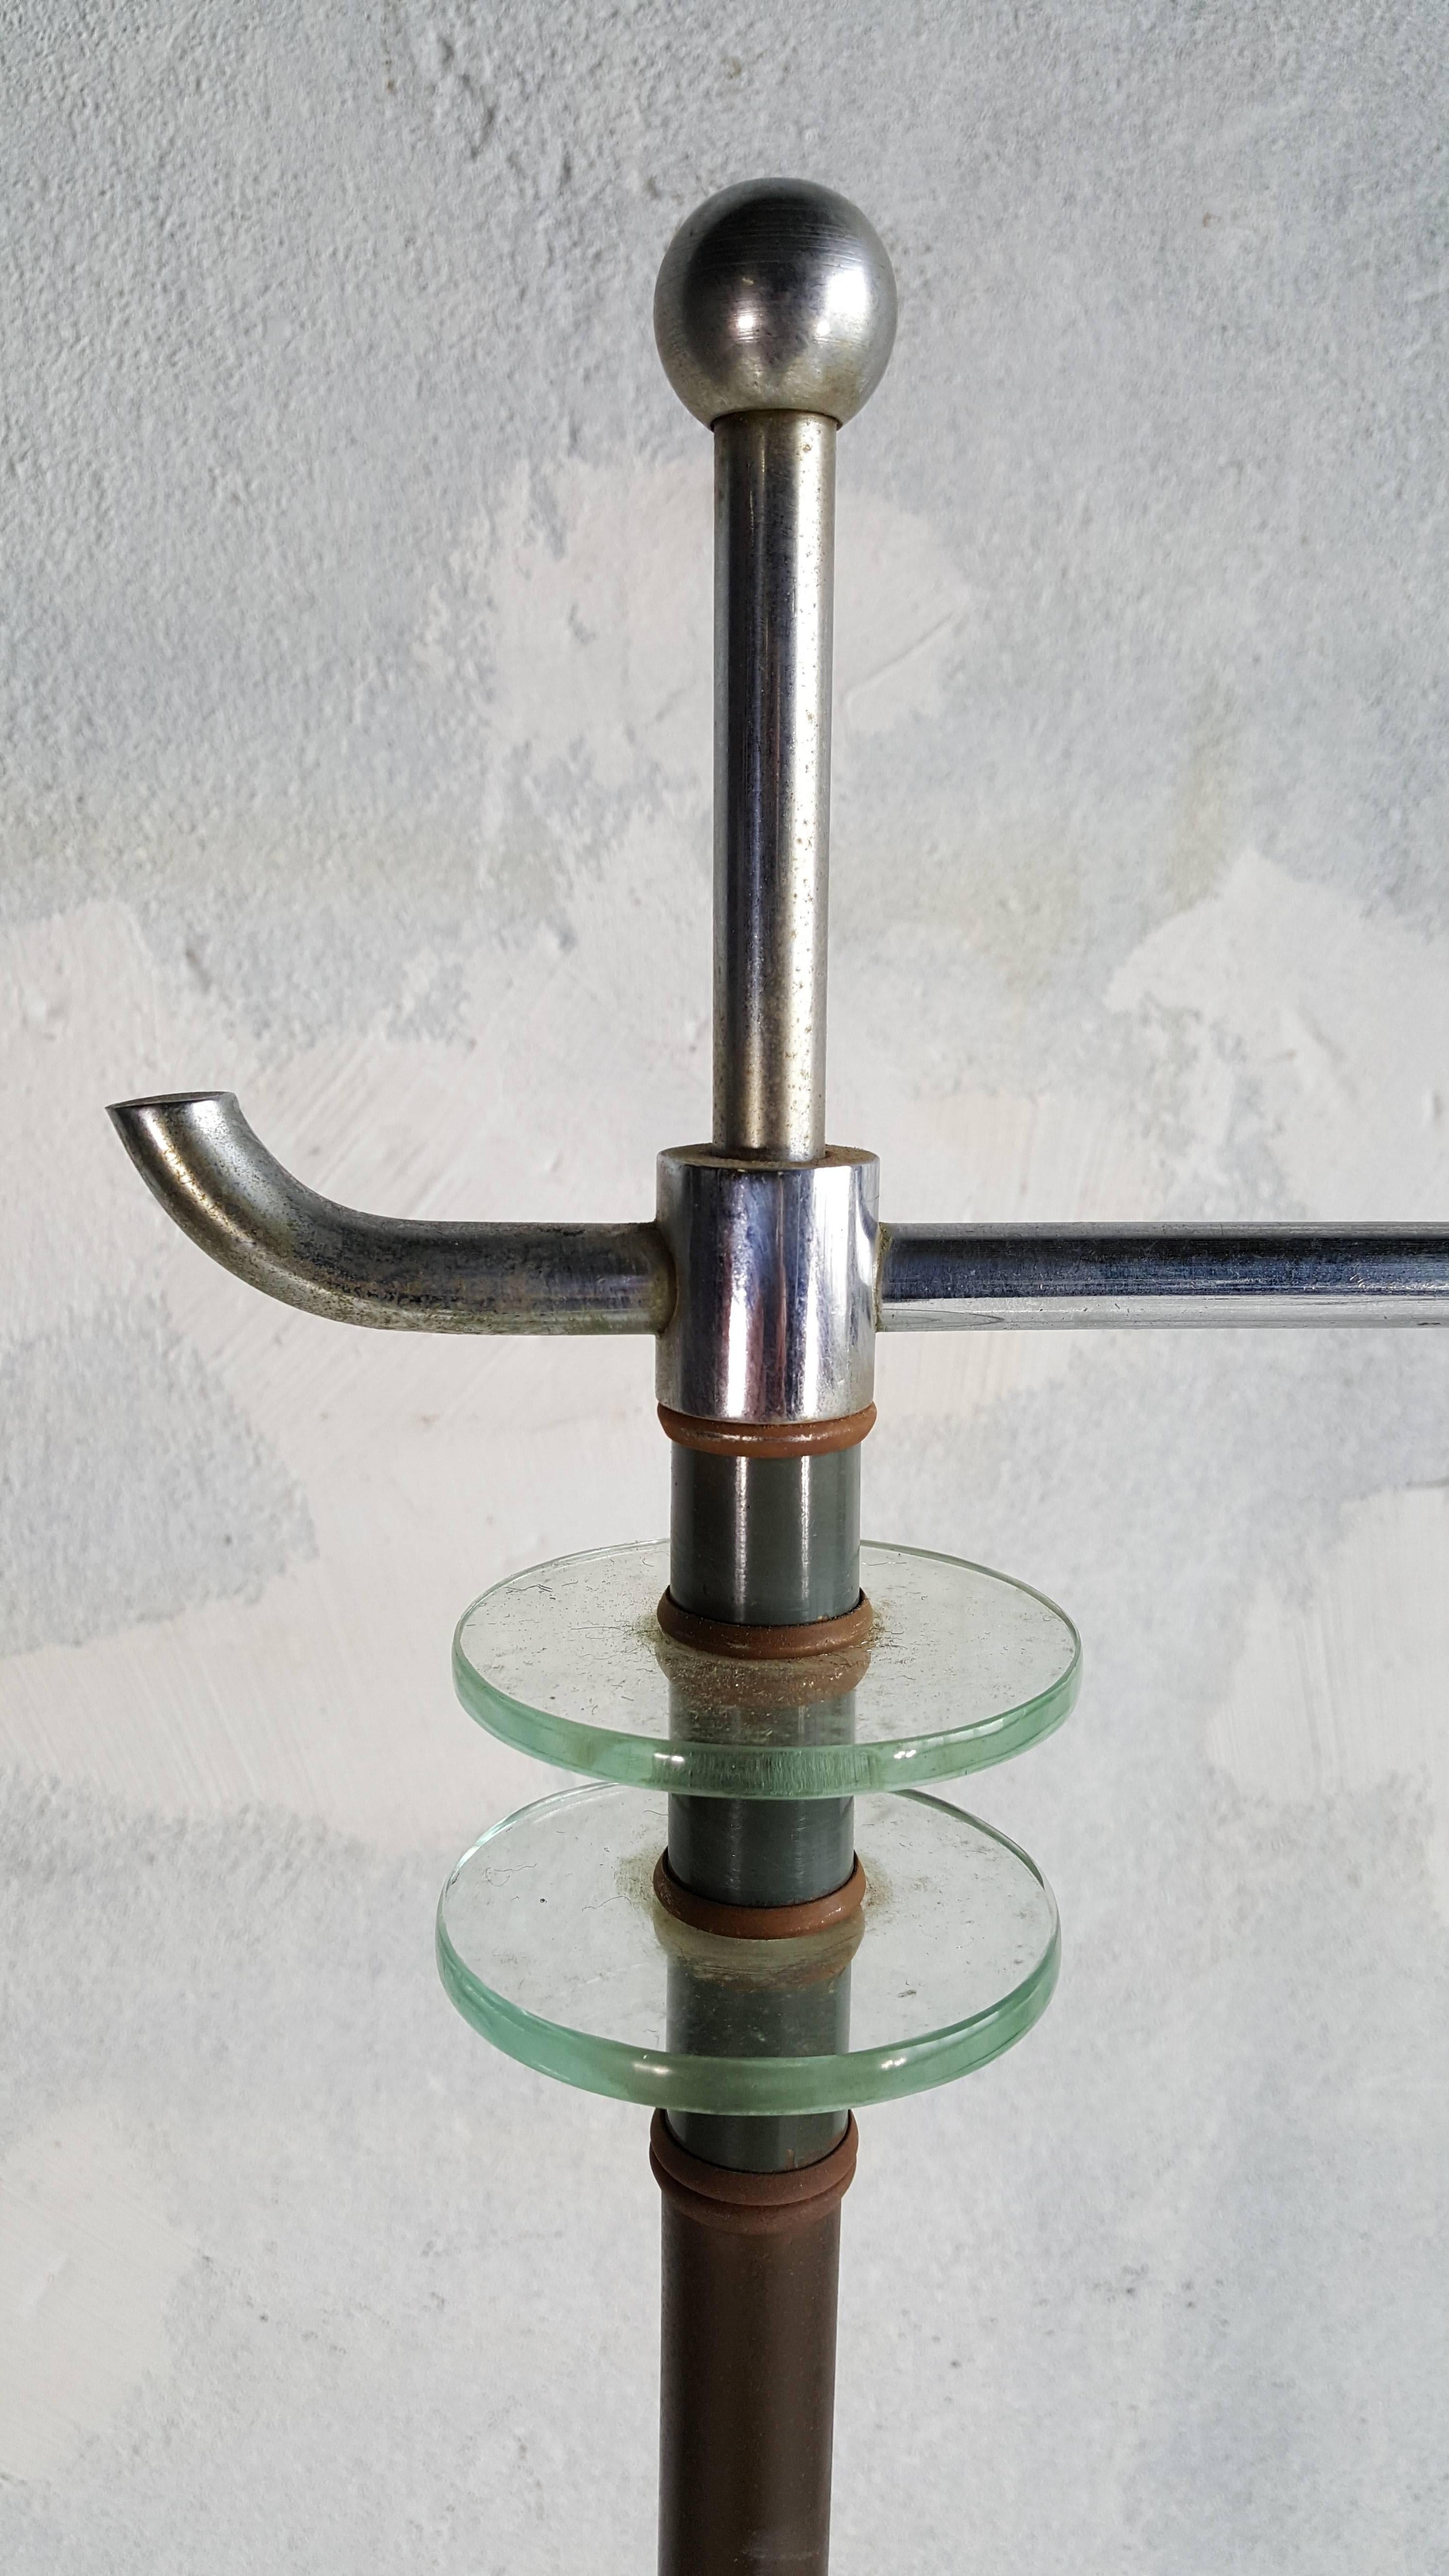 American Art Deco, Modernist Glass and Chrome Floor Lamp Style of Donald Deskey